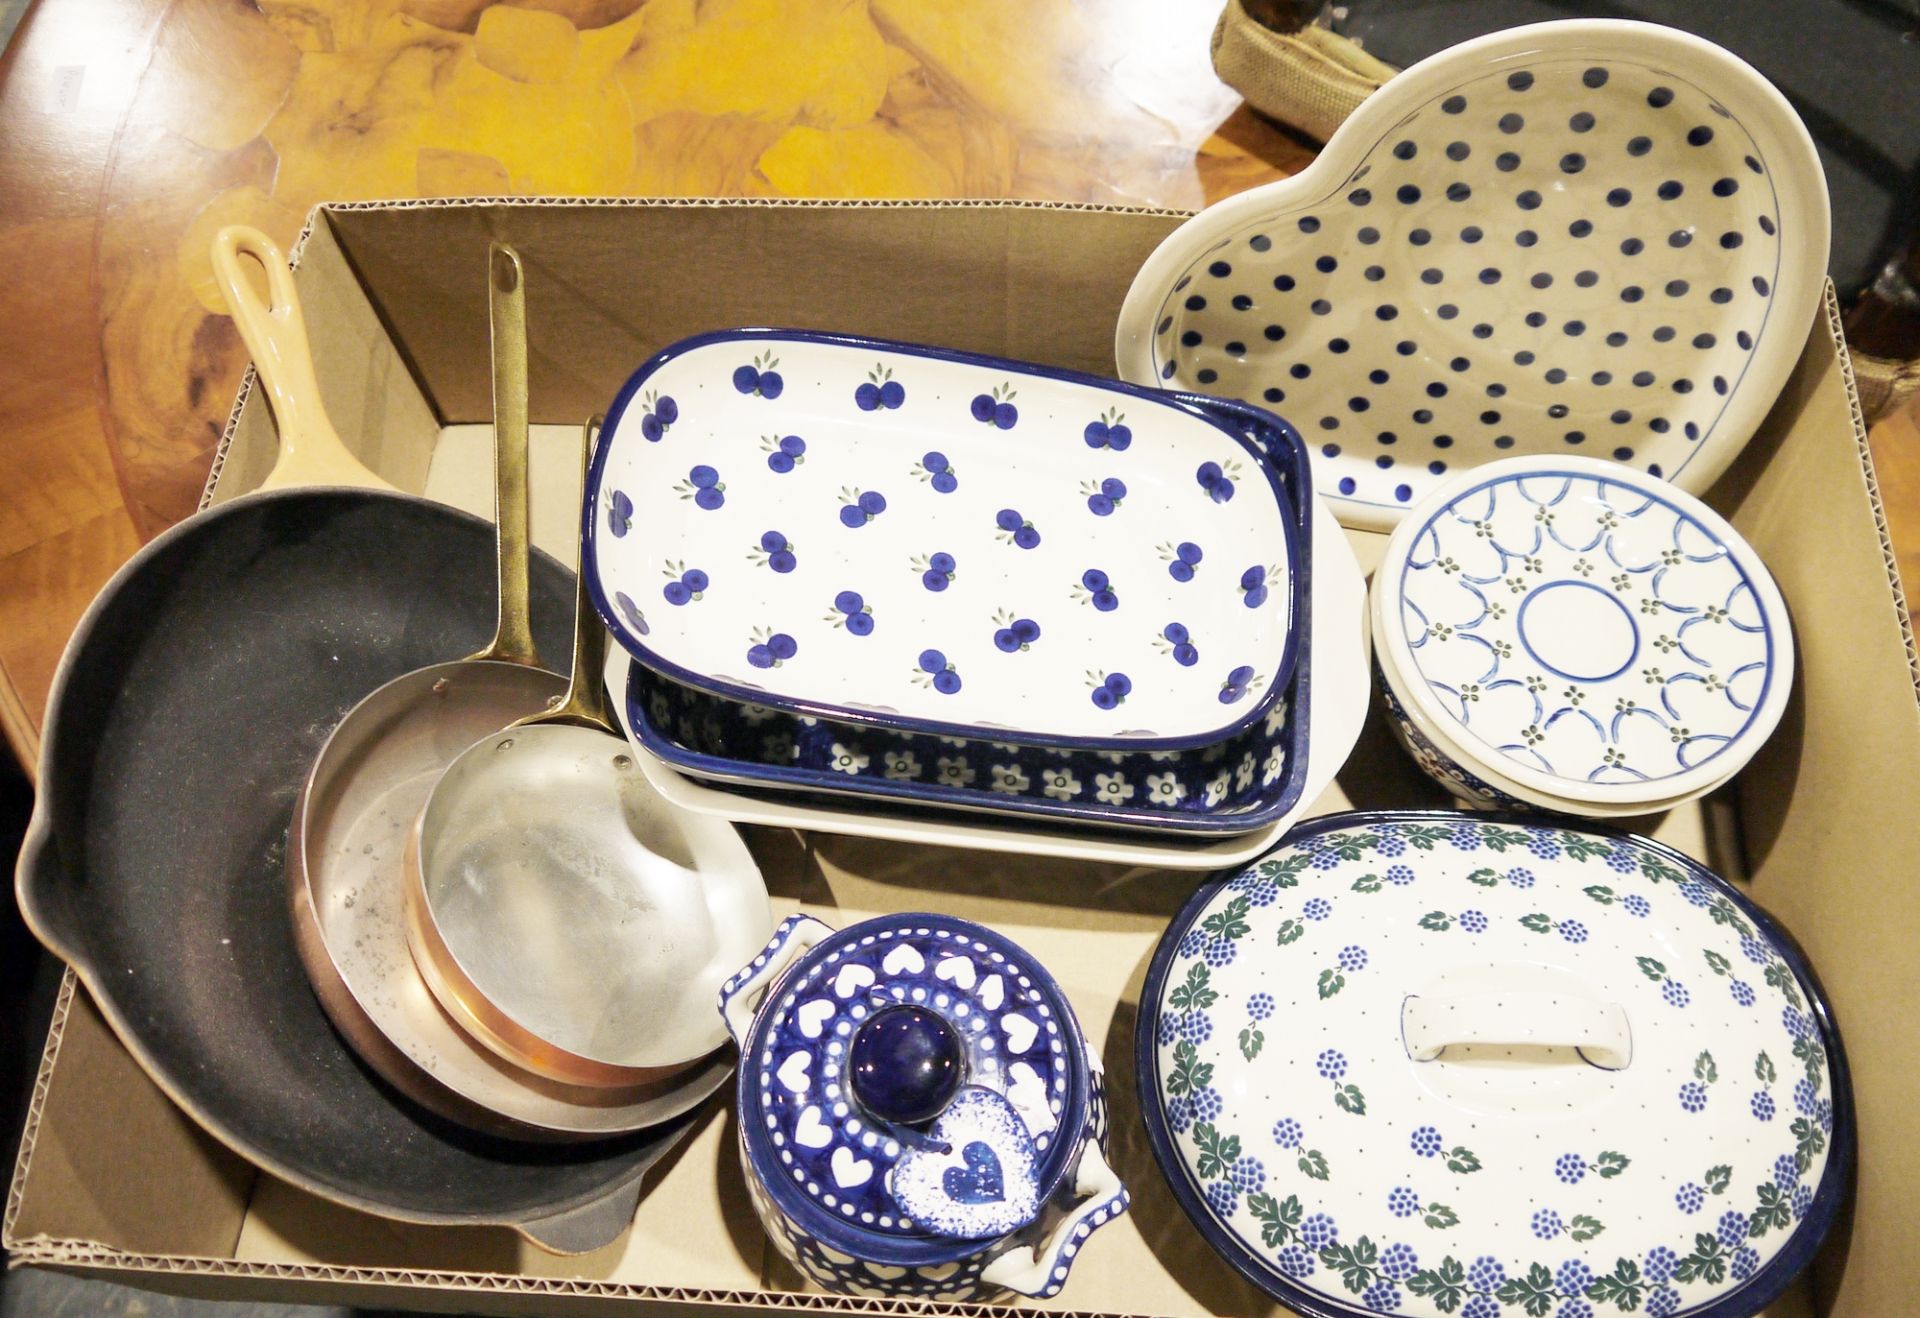 Small collection of Polish Boleslawiec stoneware to include a polka dot decorated heart-shaped